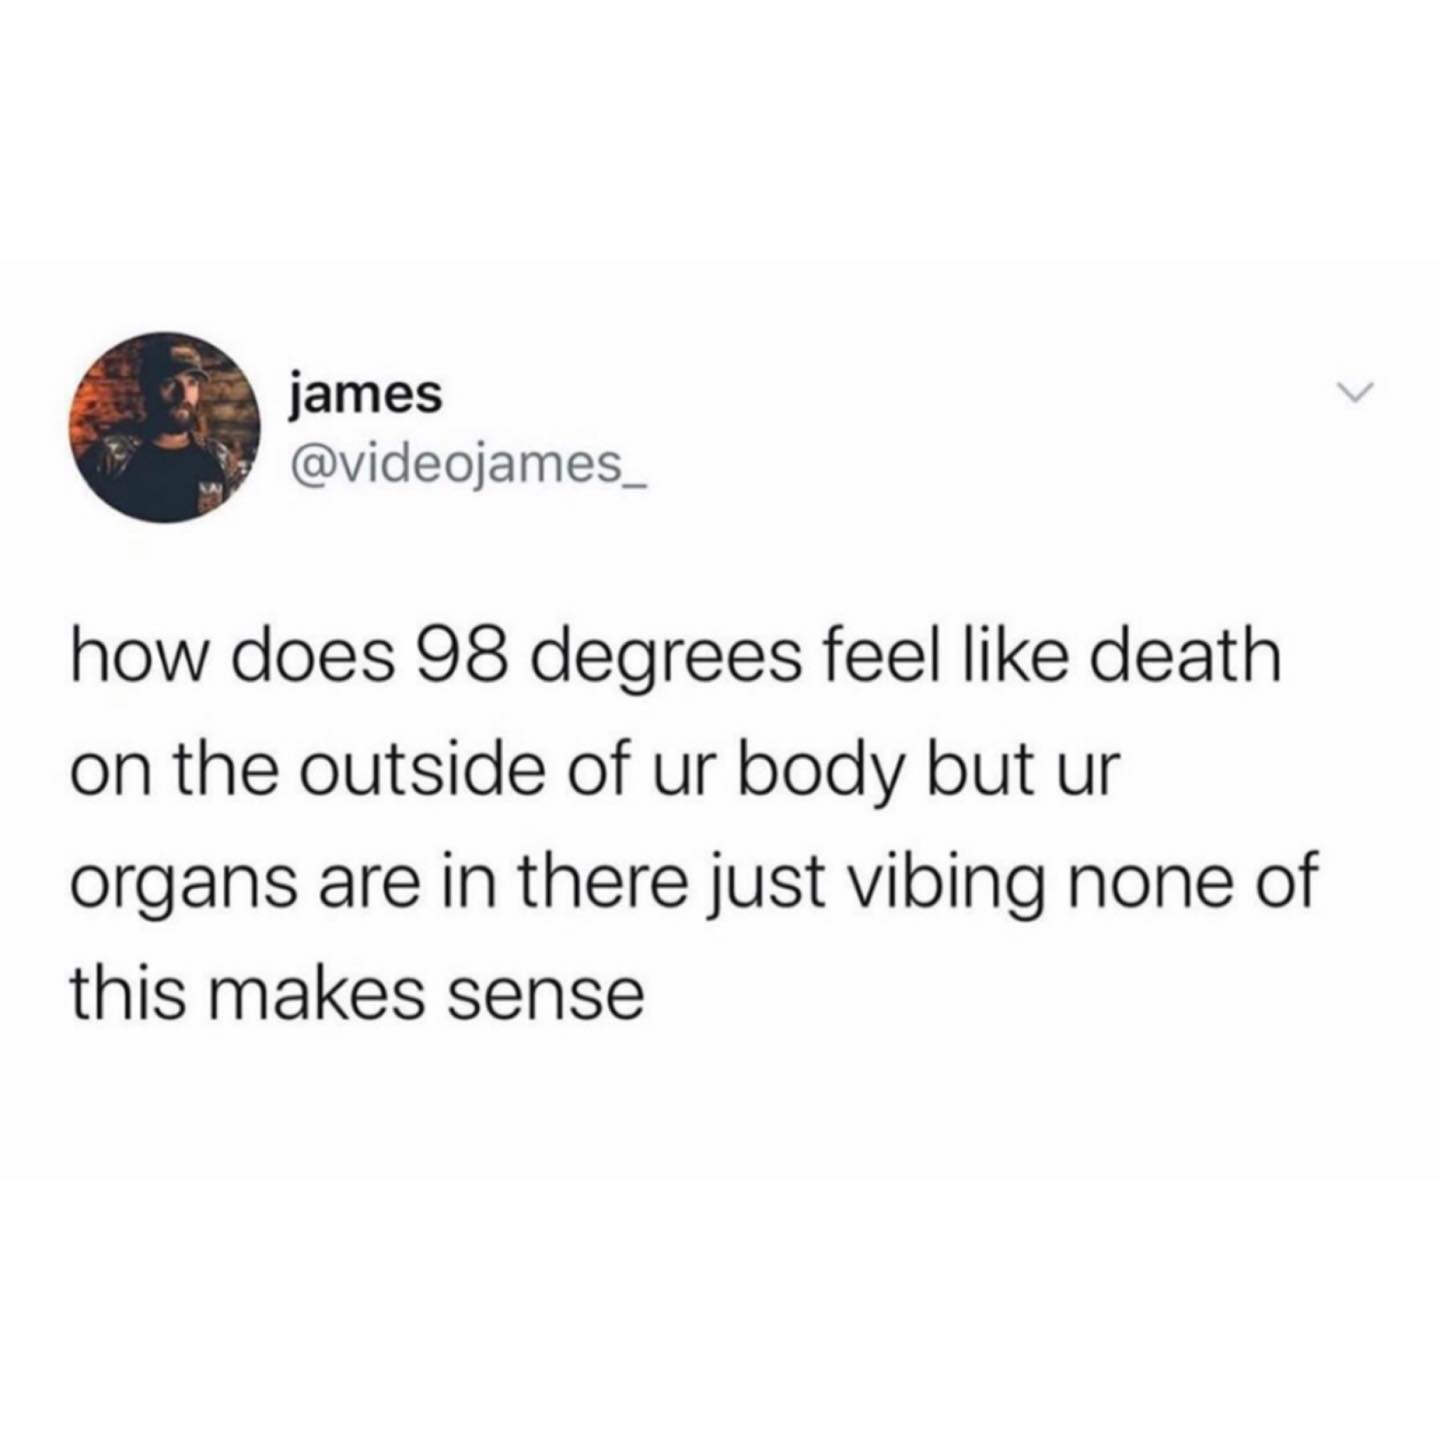 that's showbiz baby - james how does 98 degrees feel death on the outside of ur body but ur organs are in there just vibing none of this makes sense